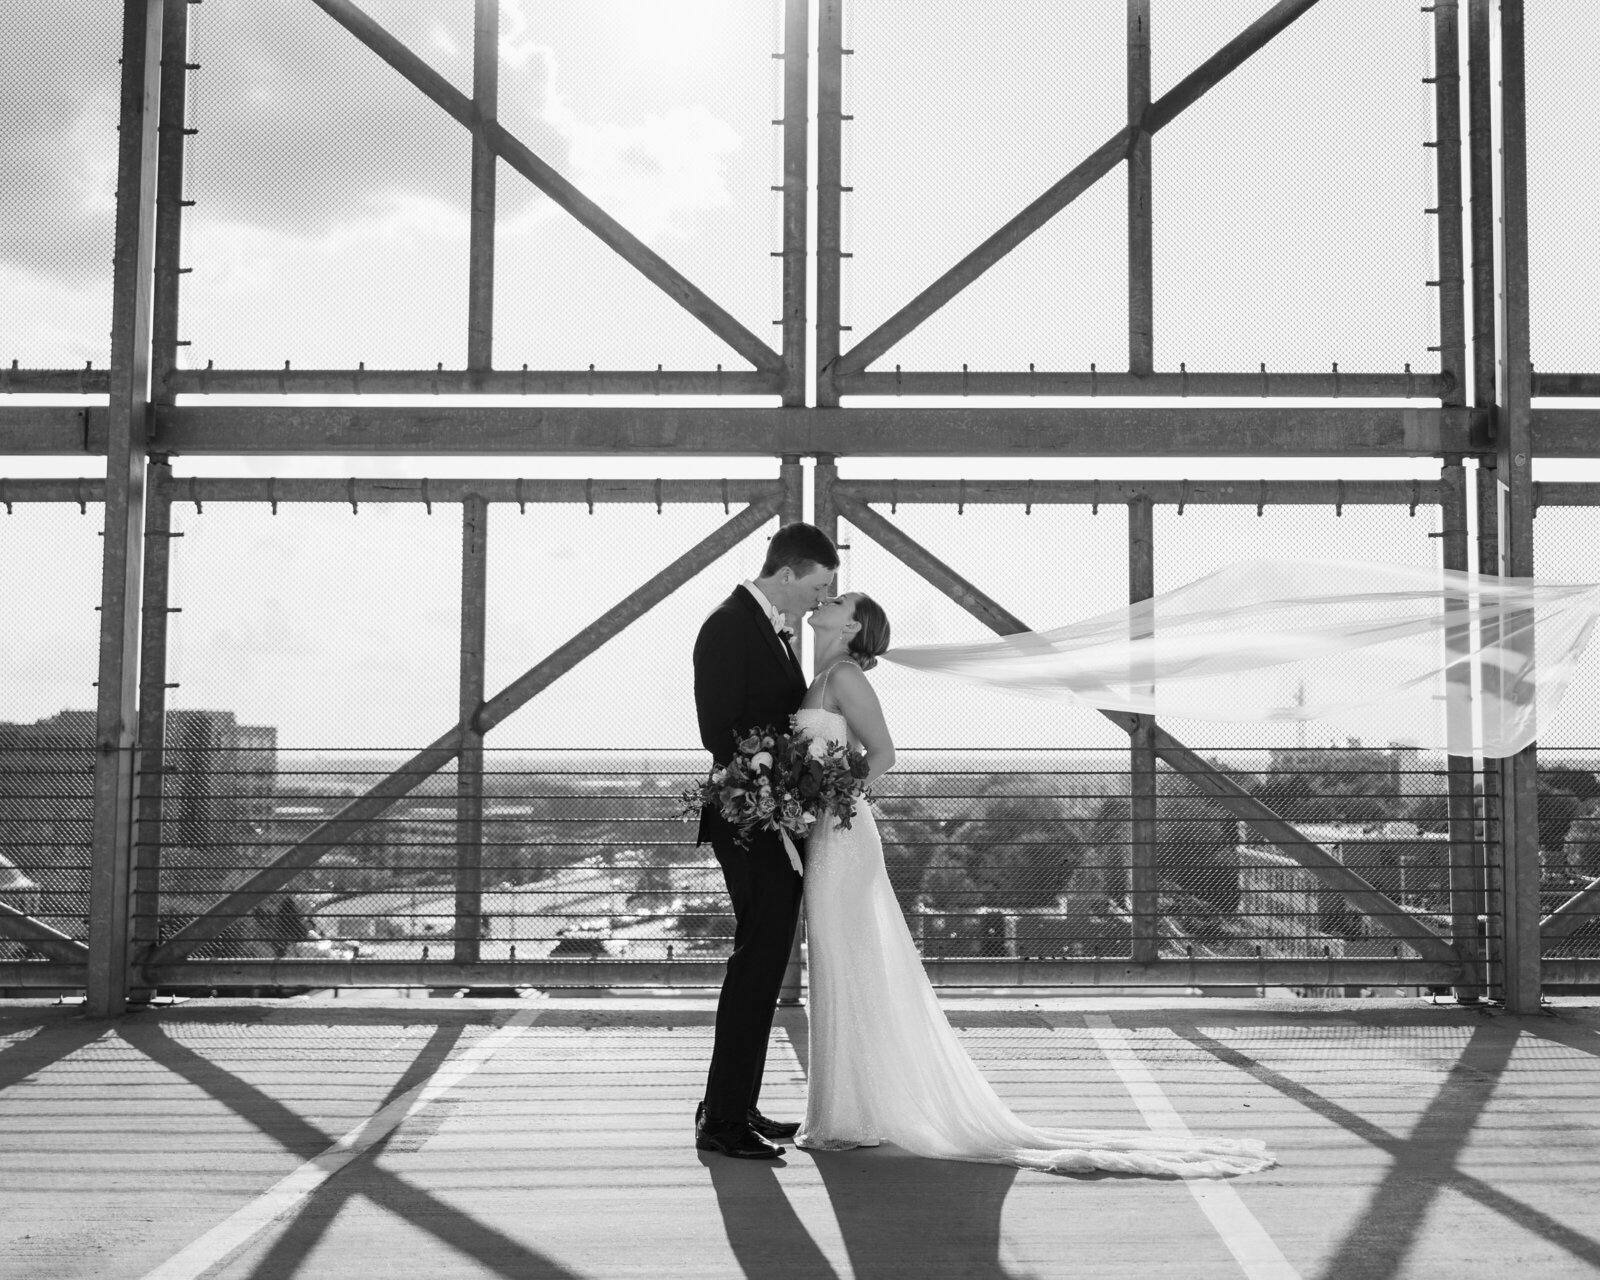 Dramatic black and white photo of a bride and groom sharing a kiss on top of a parking garage while the bride's veil sails in the wind